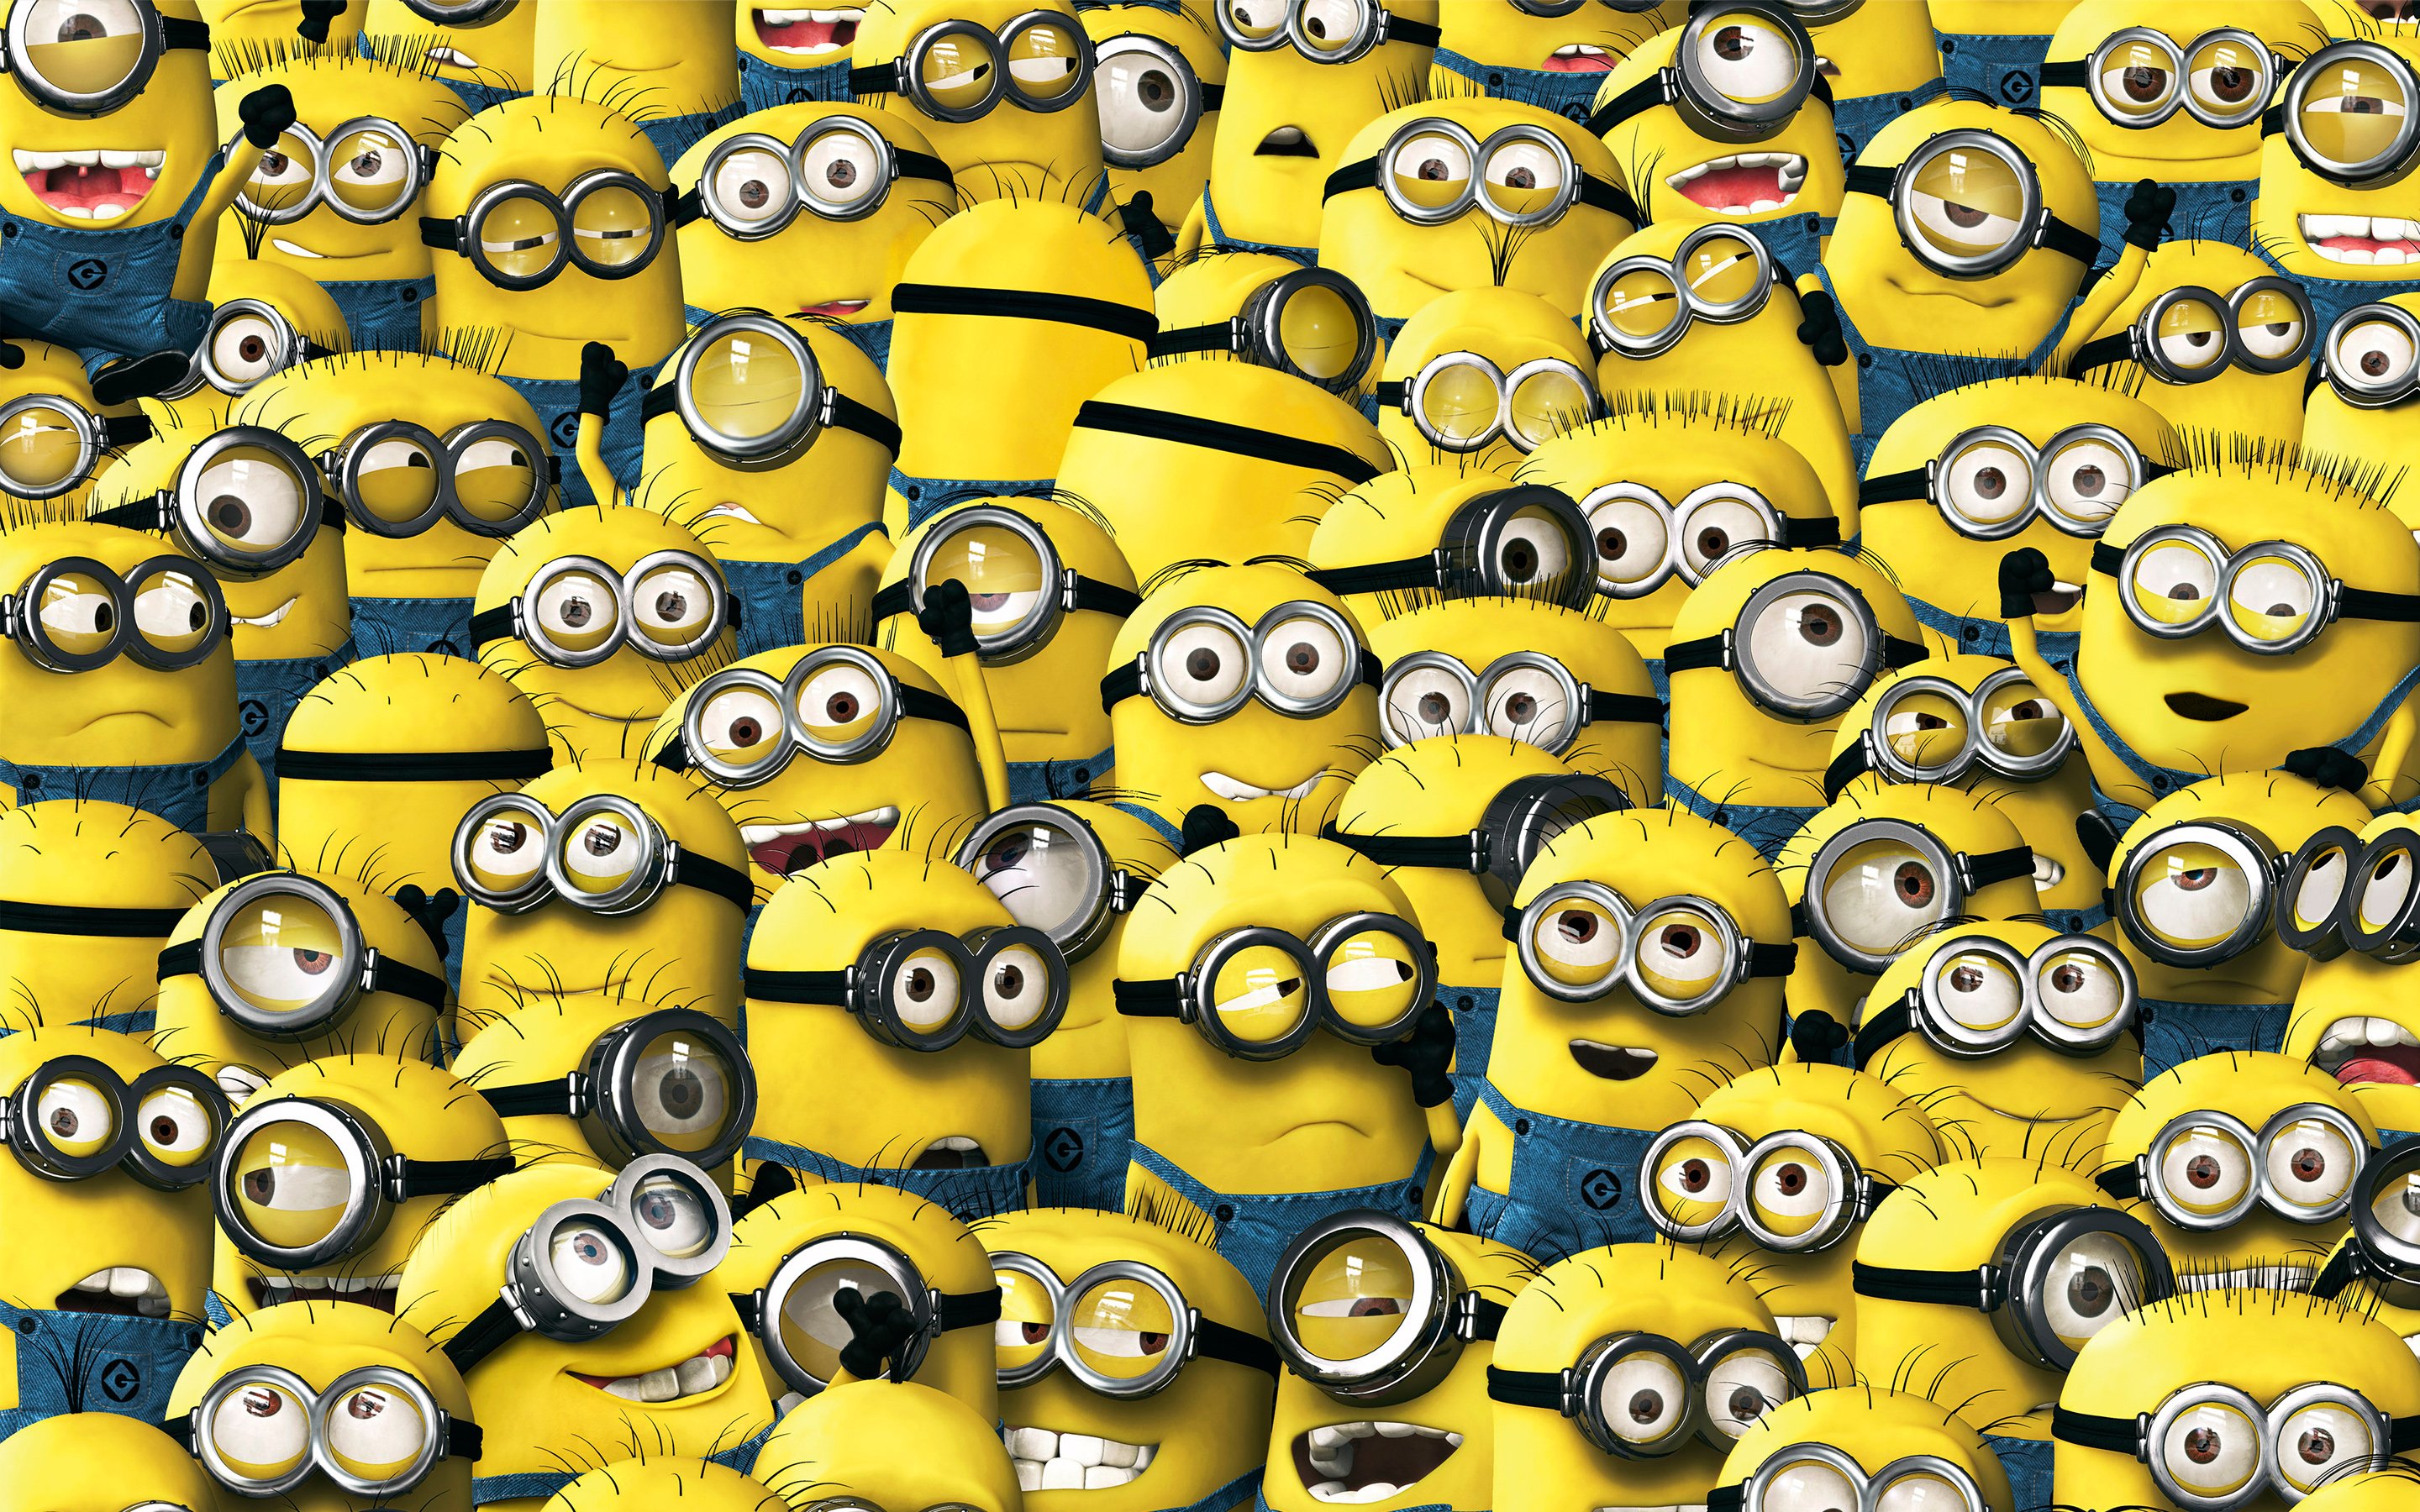 Minionpalooza: Minions are redefining culture from villainy to copyright